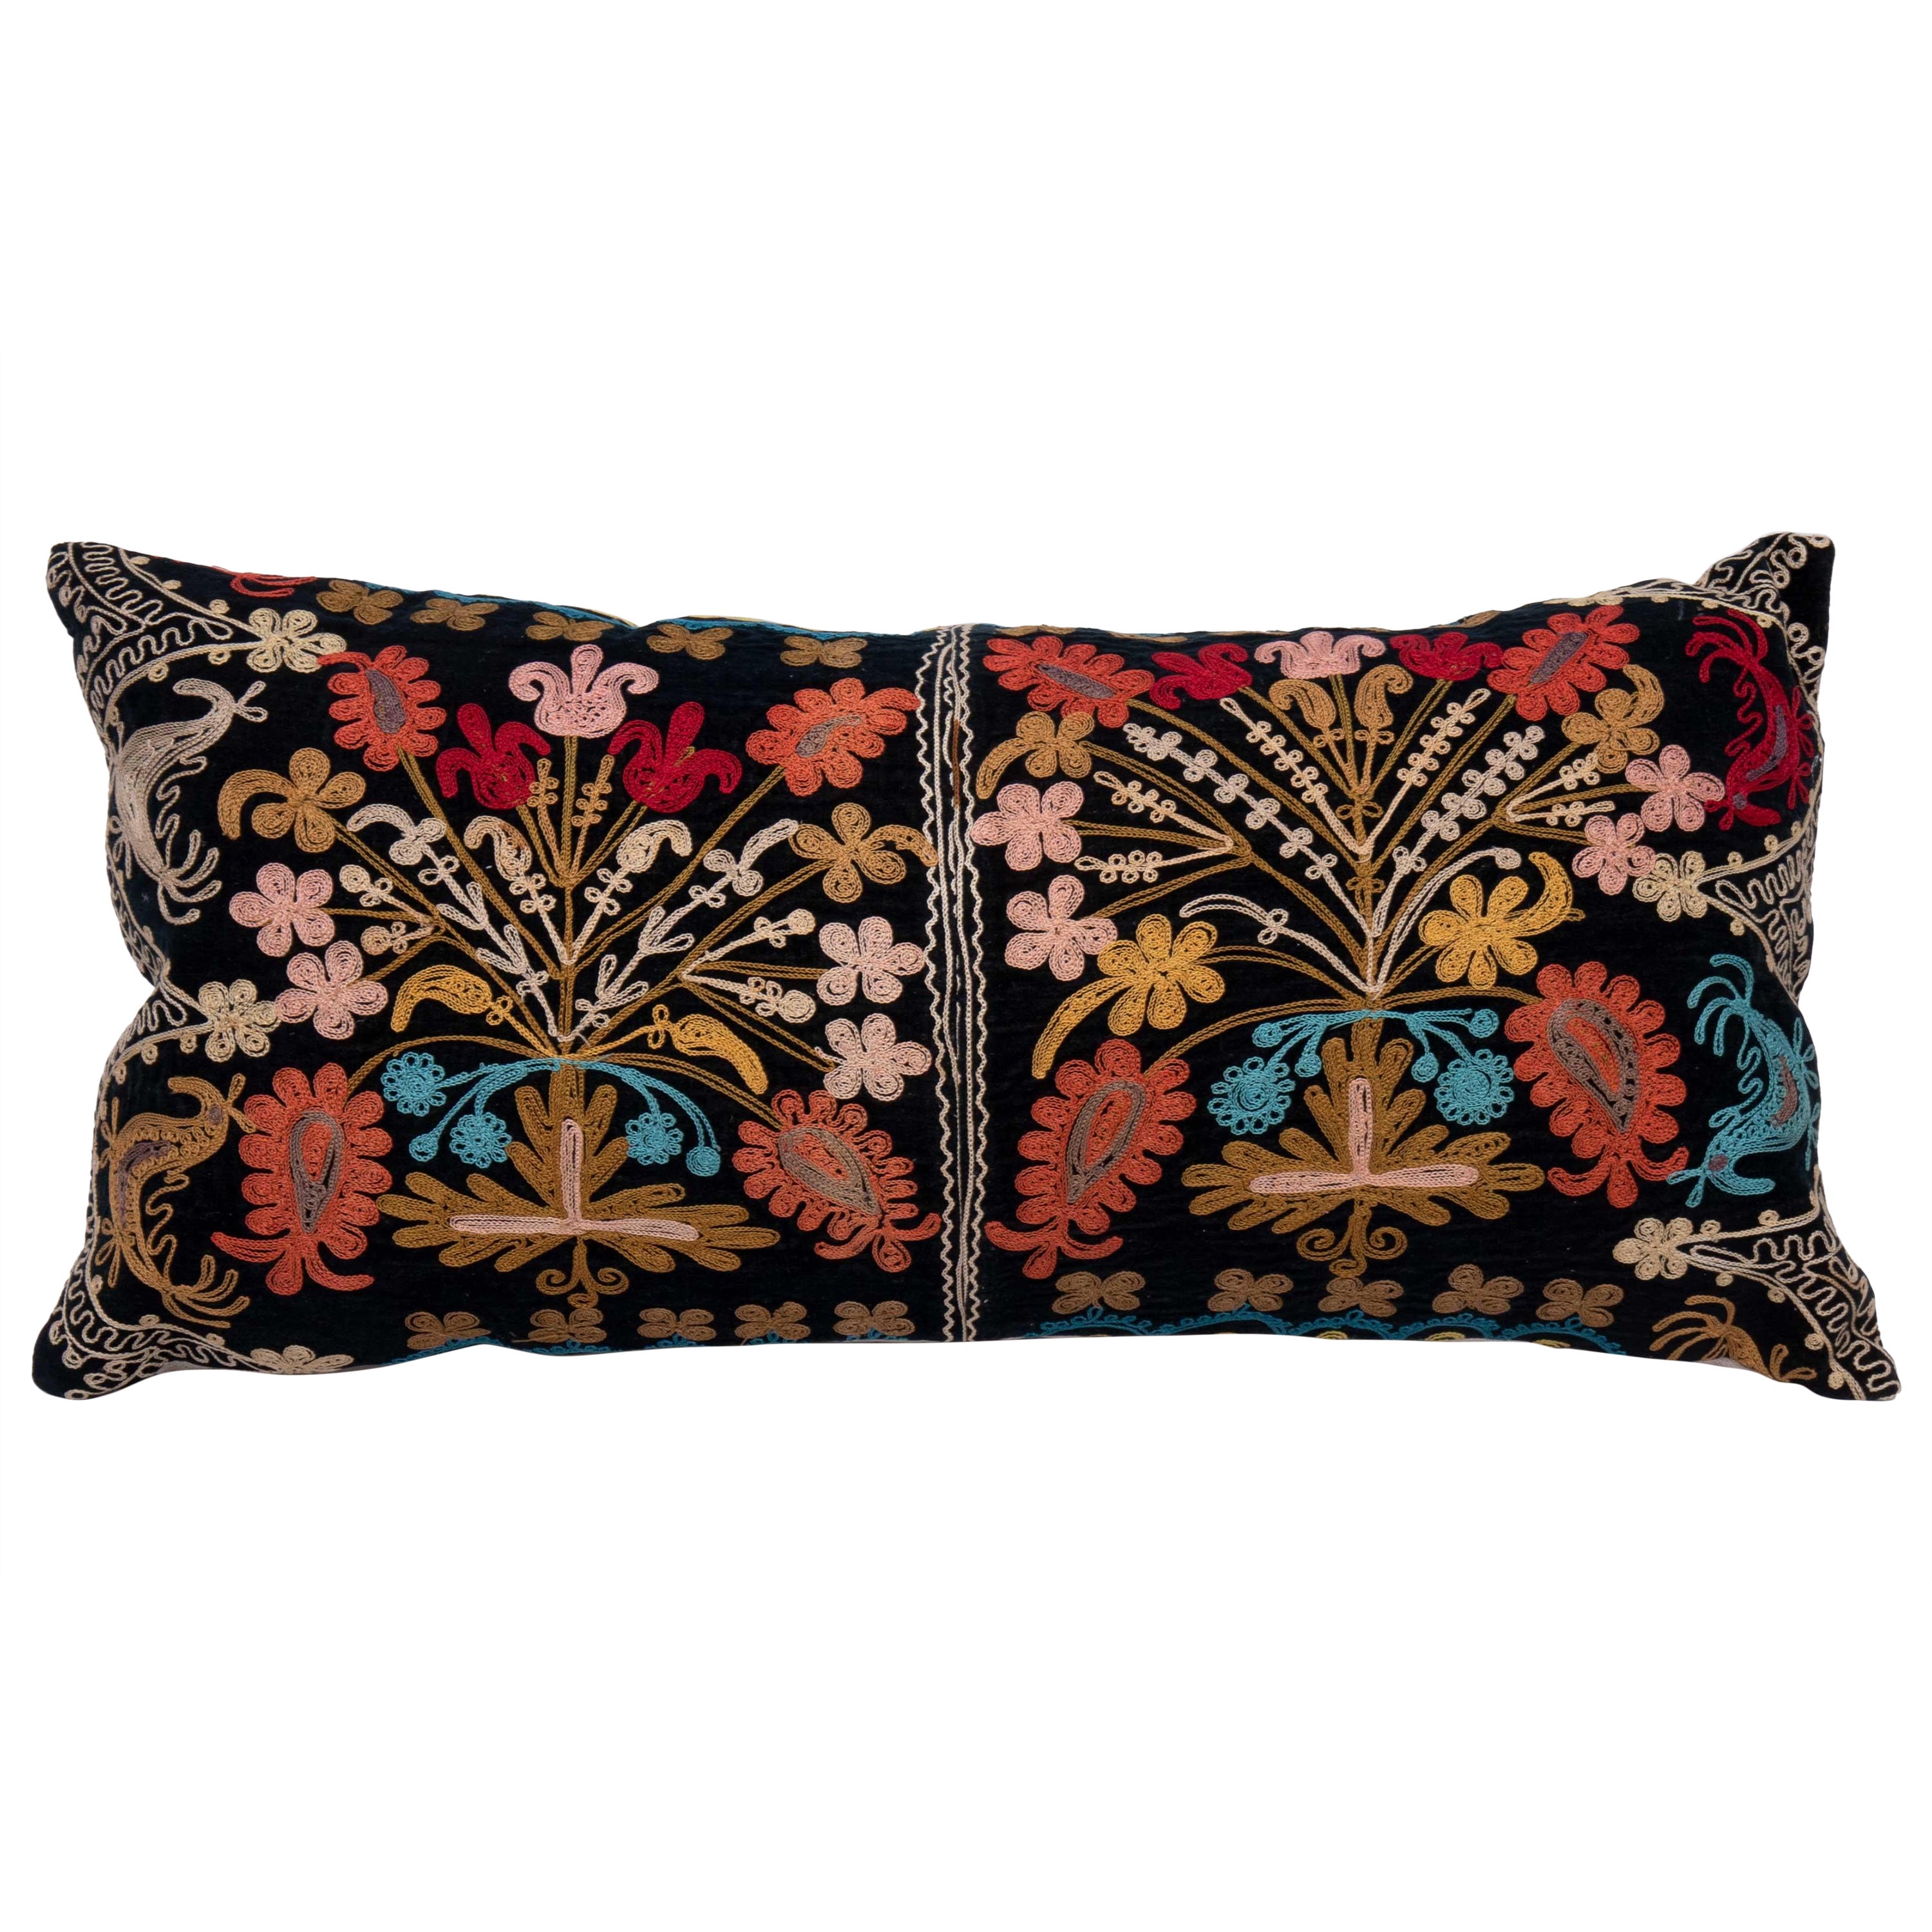 Suzani Pillow Cover Made from a Vintage Velvet Suzani